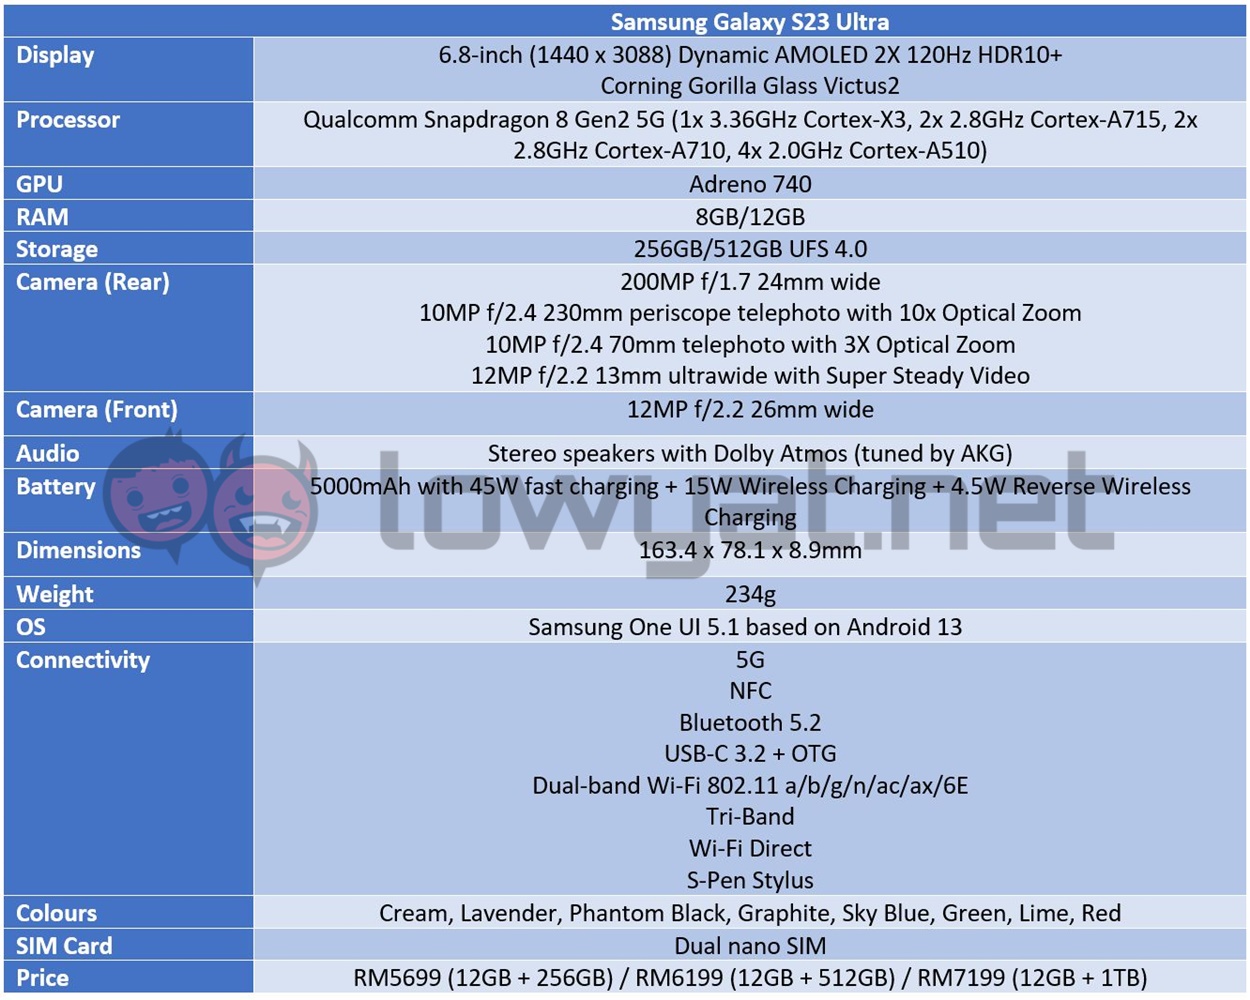 Samsung Galaxy S23 Ultra launched with 200MP camera; check complete specs,  features - BusinessToday